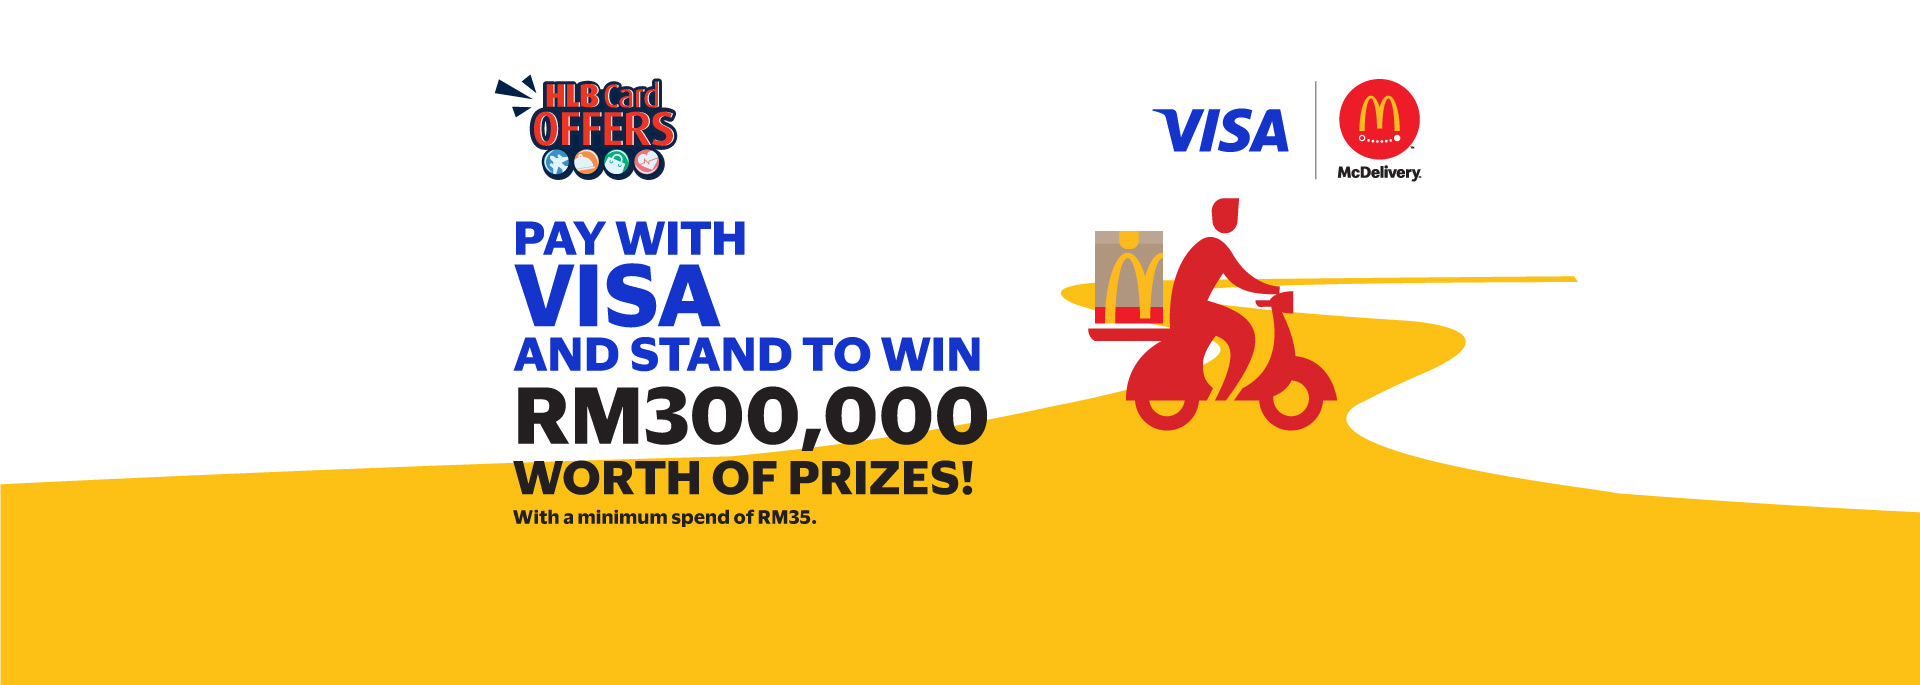 Prizes worth up to RM300,000 is up for grabs!